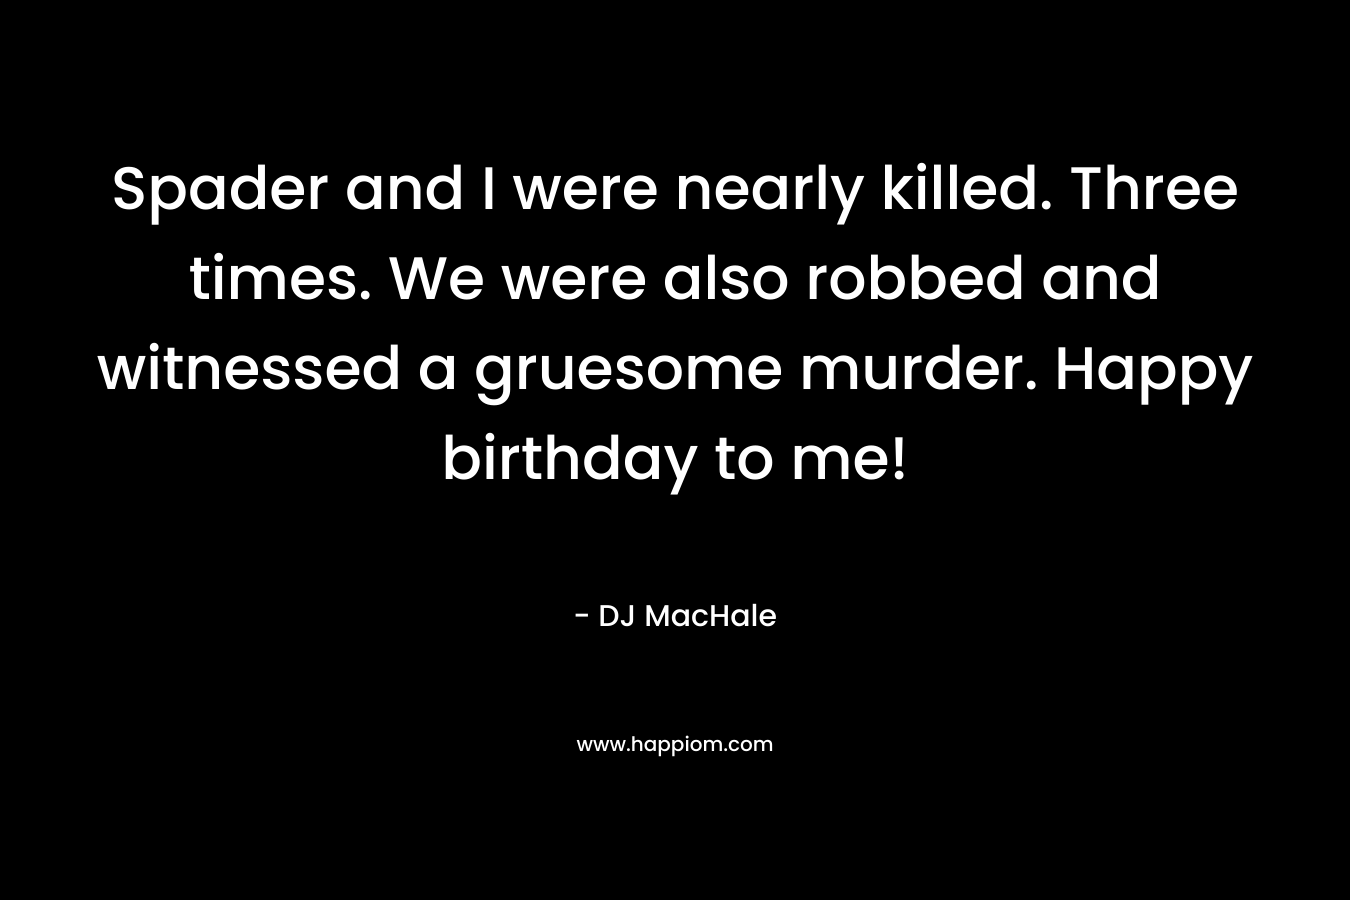 Spader and I were nearly killed. Three times. We were also robbed and witnessed a gruesome murder. Happy birthday to me!